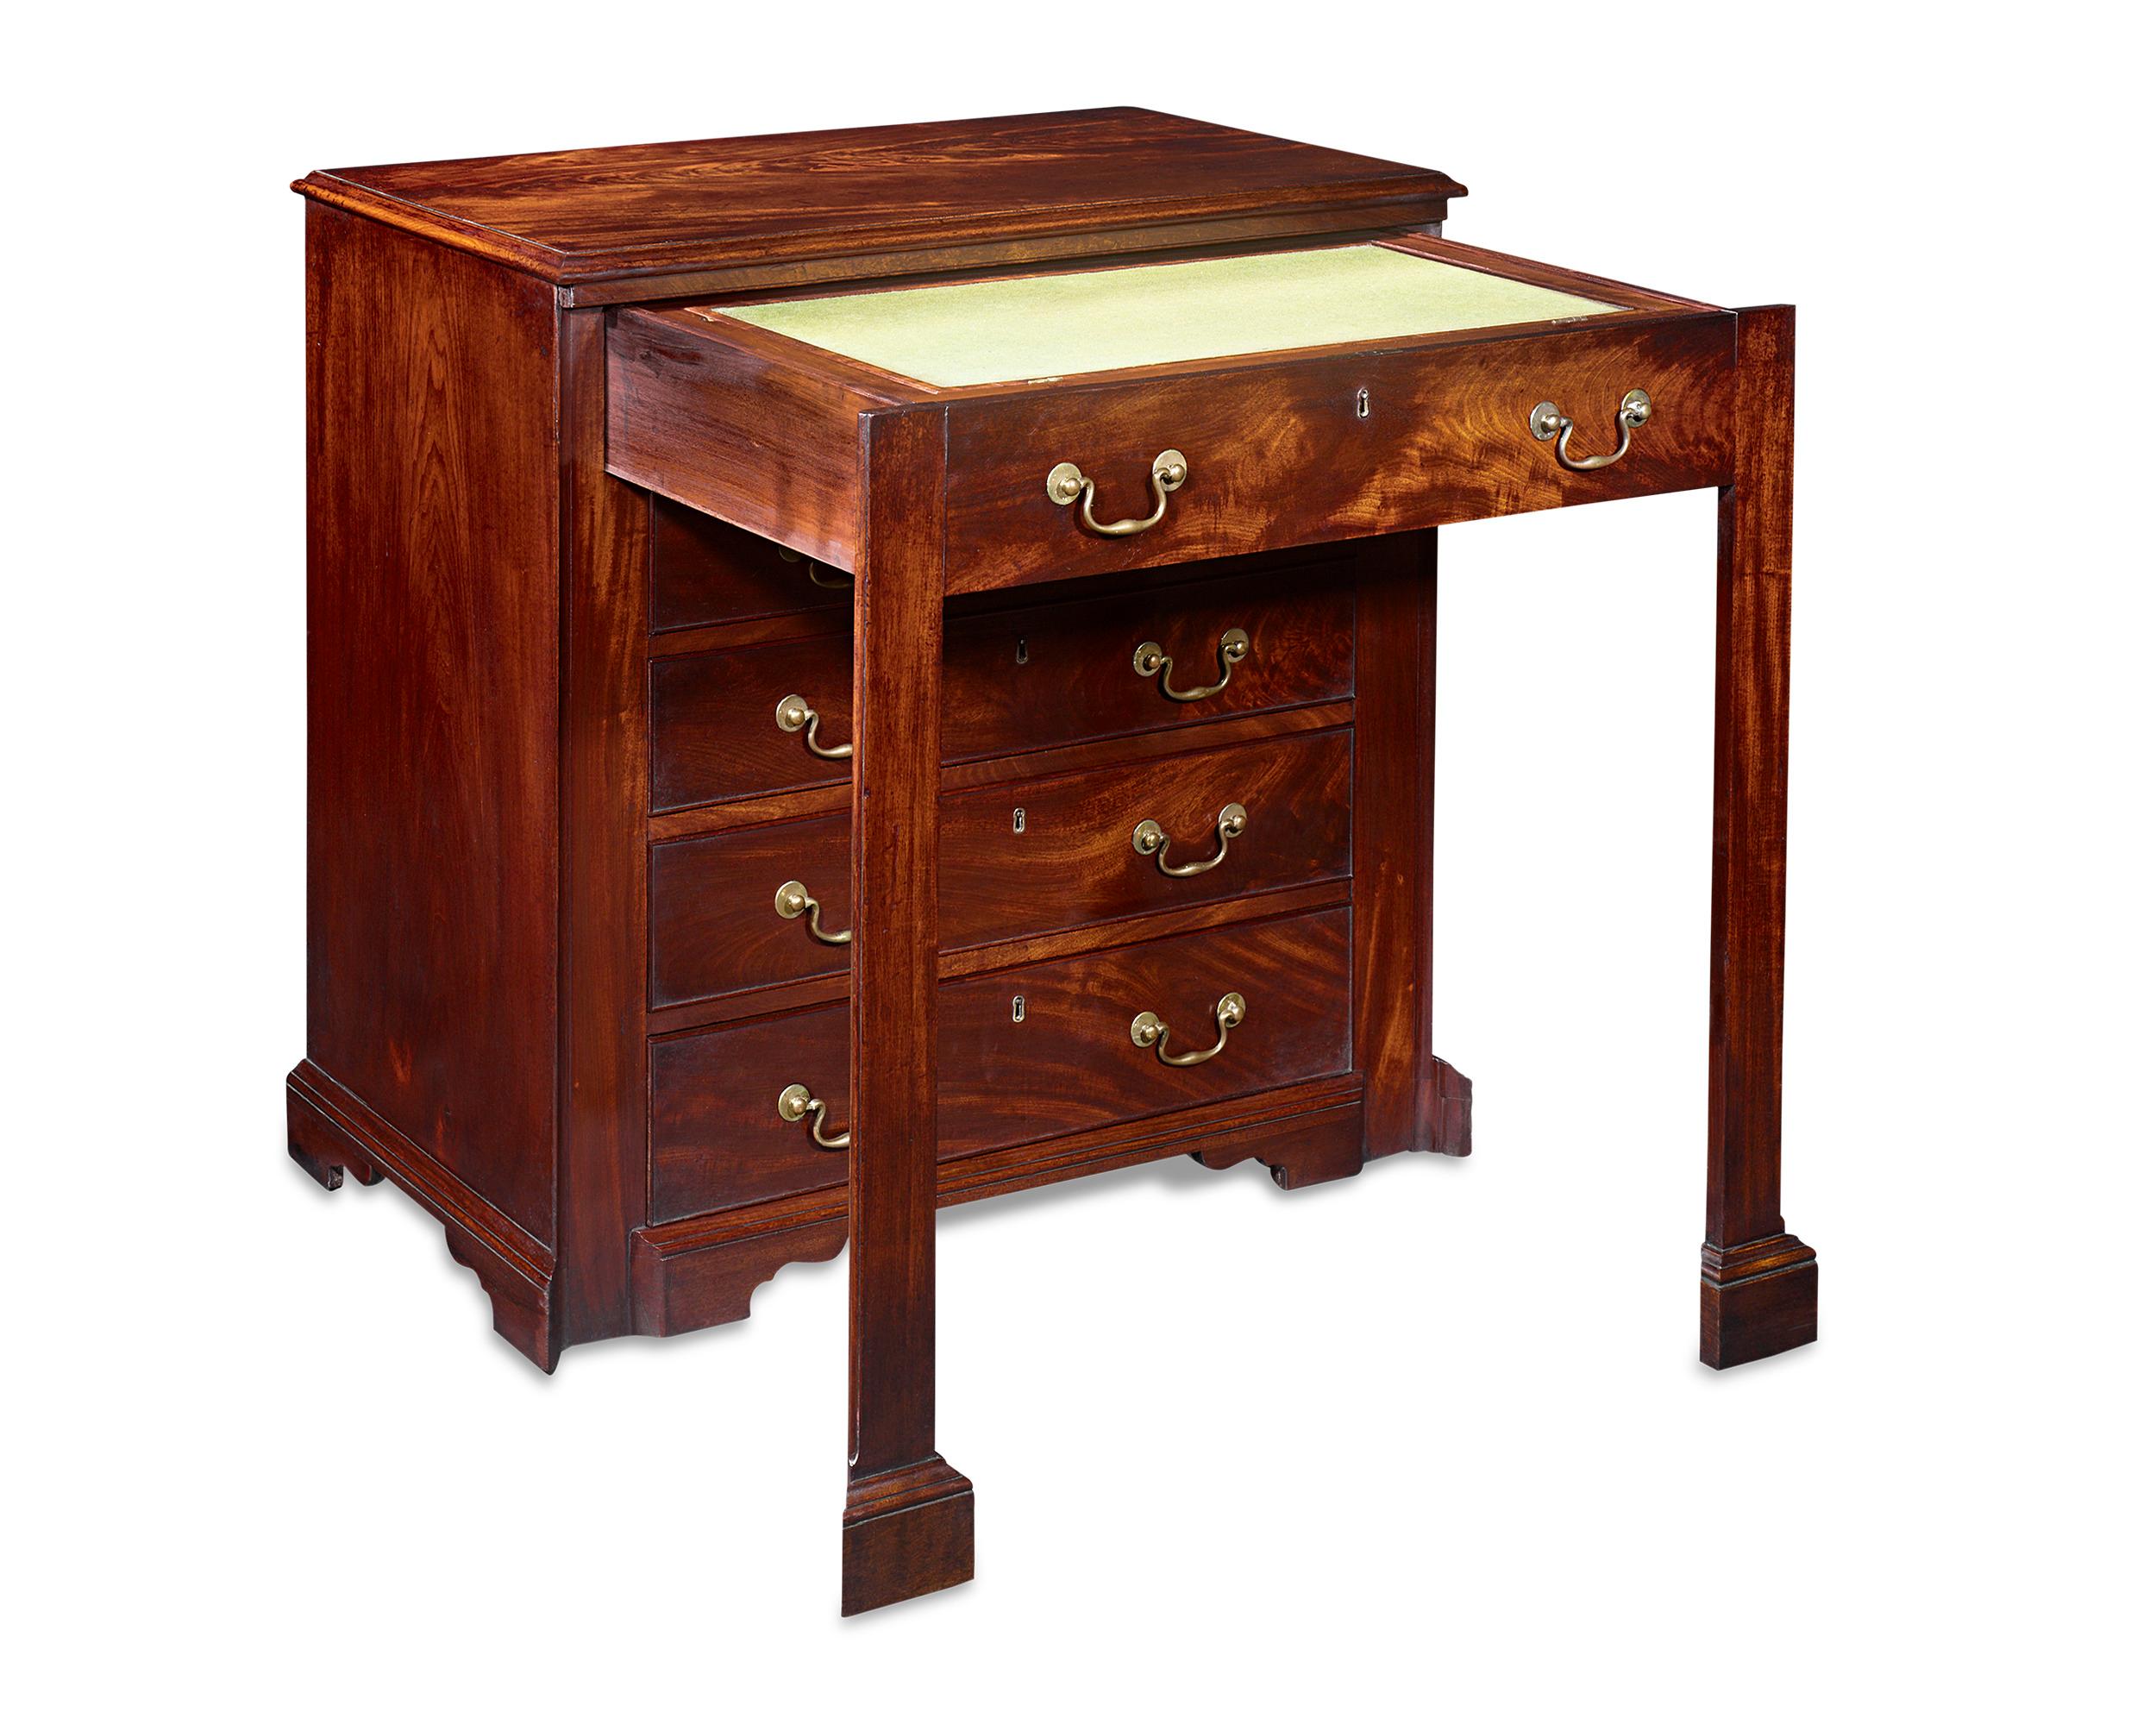 This magnificent George II writing chest was crafted by the legendary cabinetmaker Thomas Chippendale. A metamorphic table, the top drawer slides out to reveal a green felted writing station. The timber on this piece is the finest quality Cuban